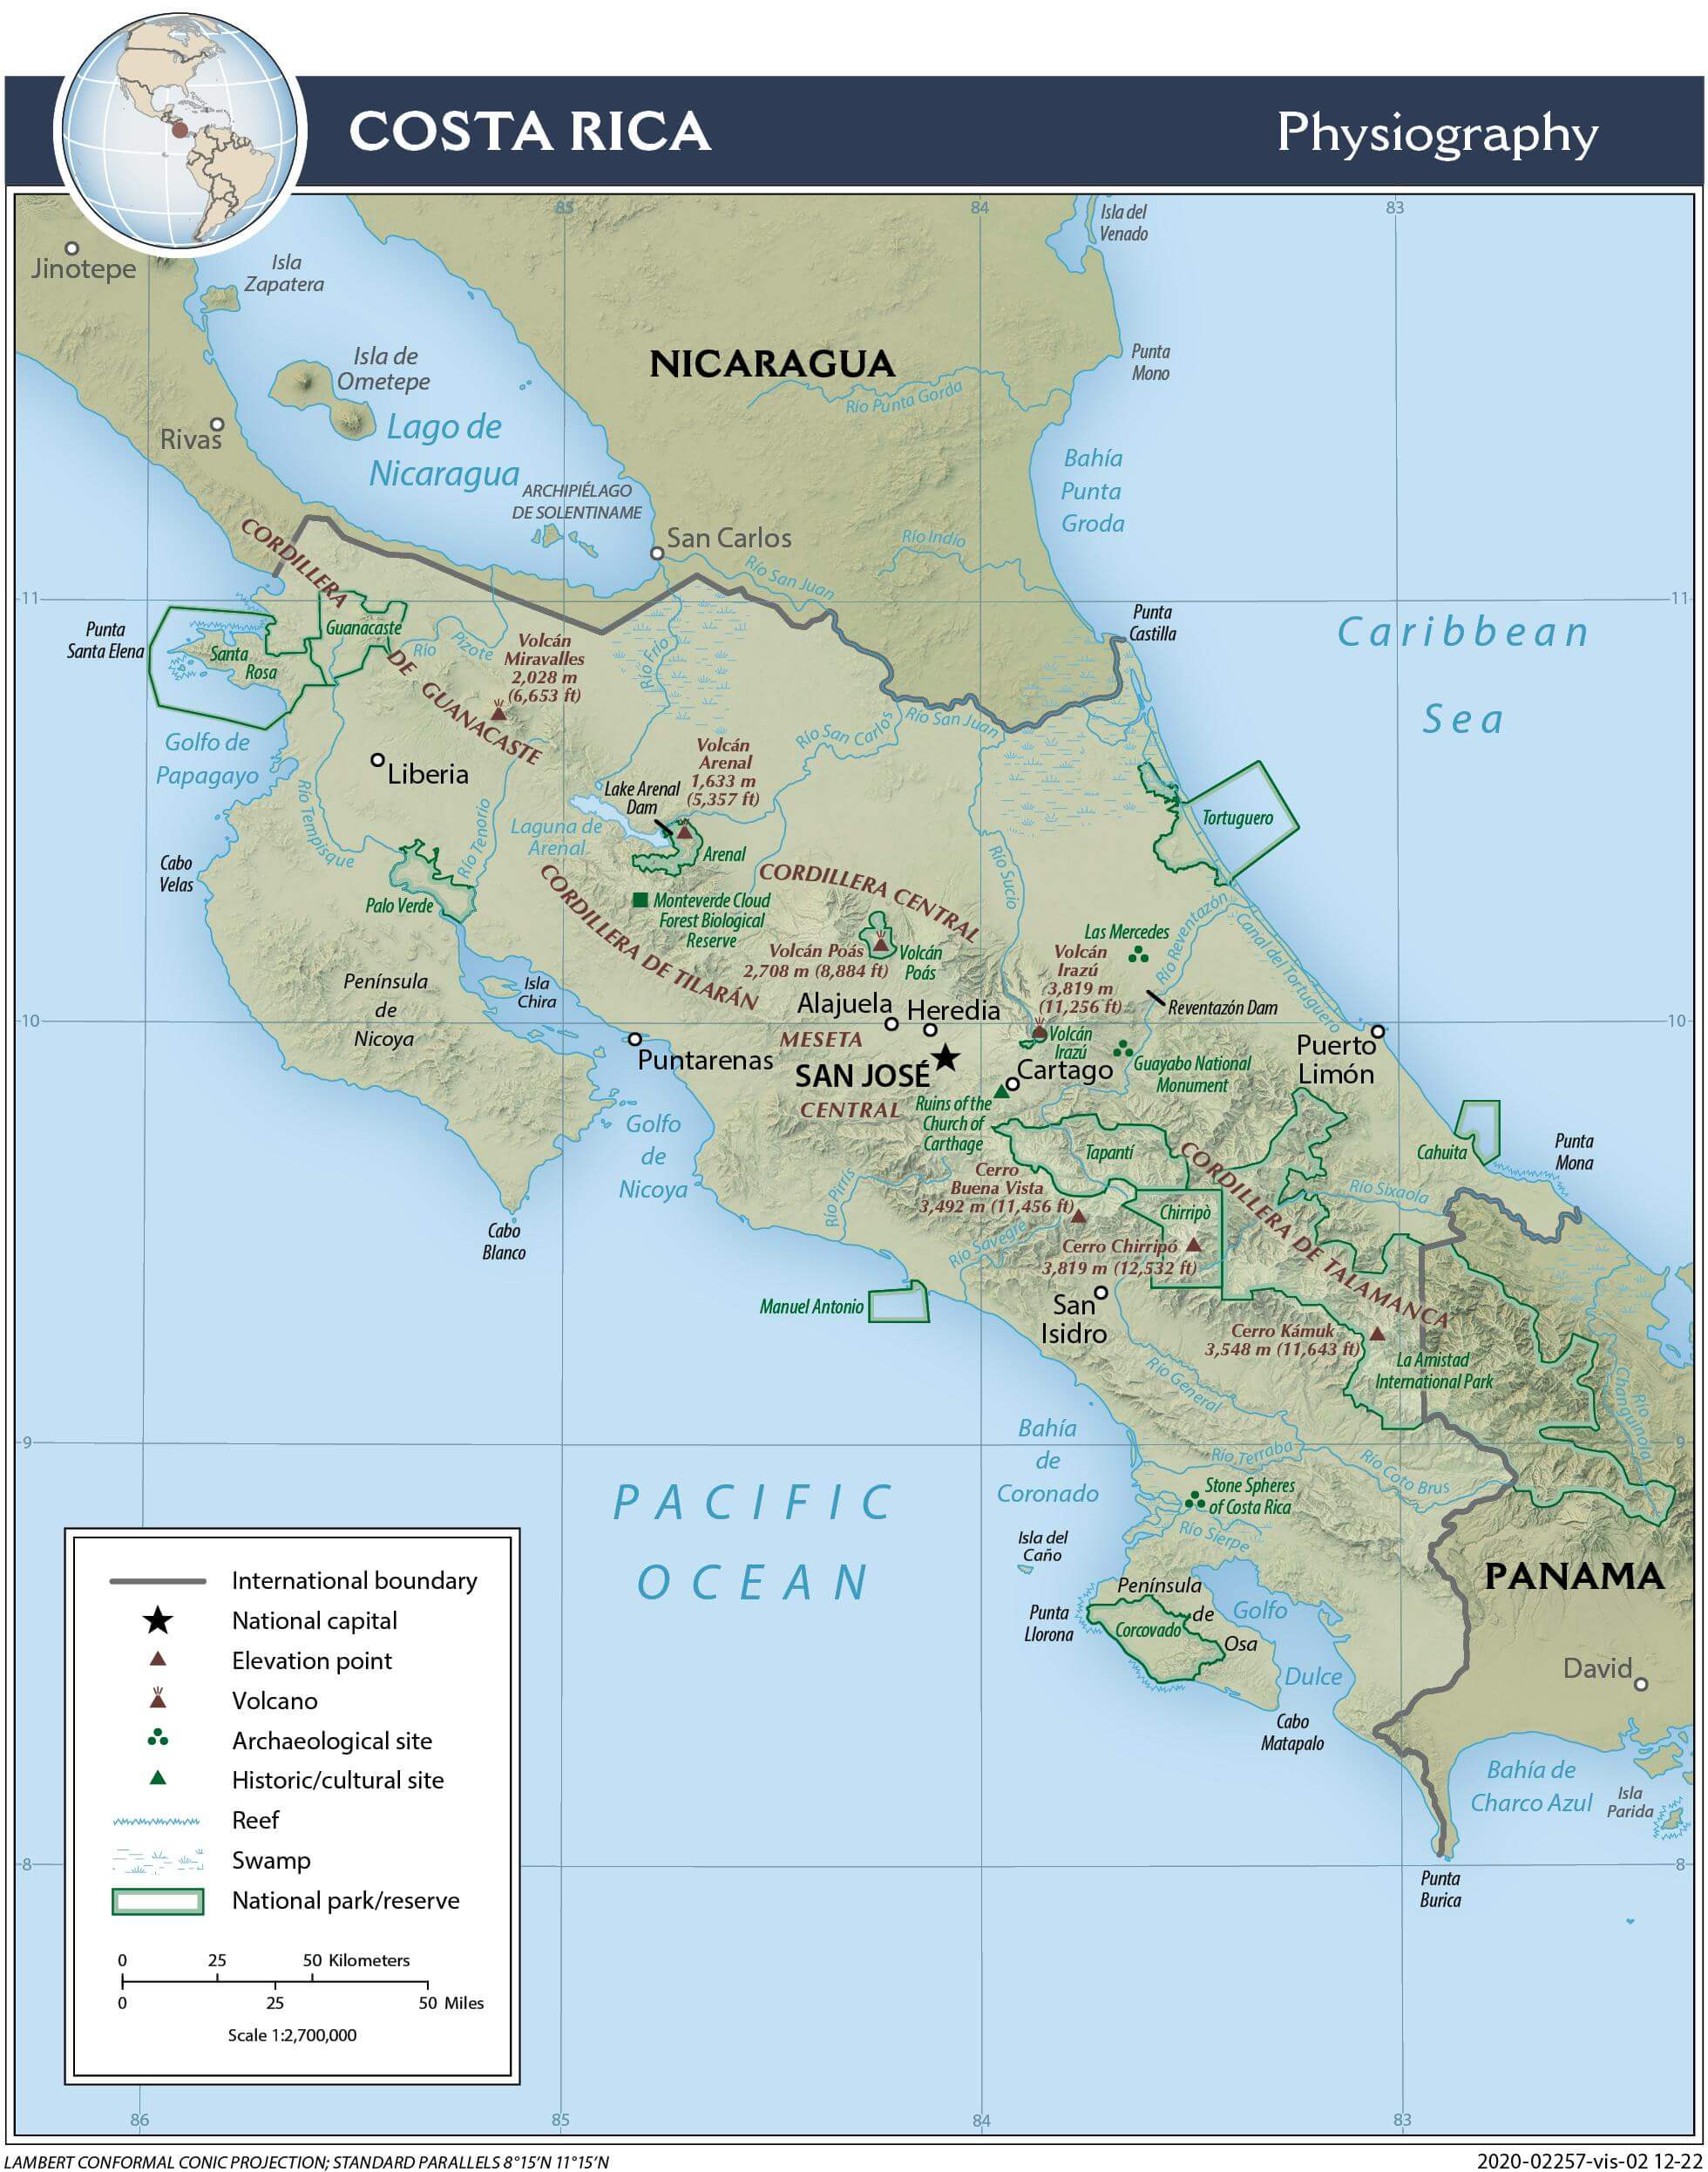 Costa Rica physiographic map